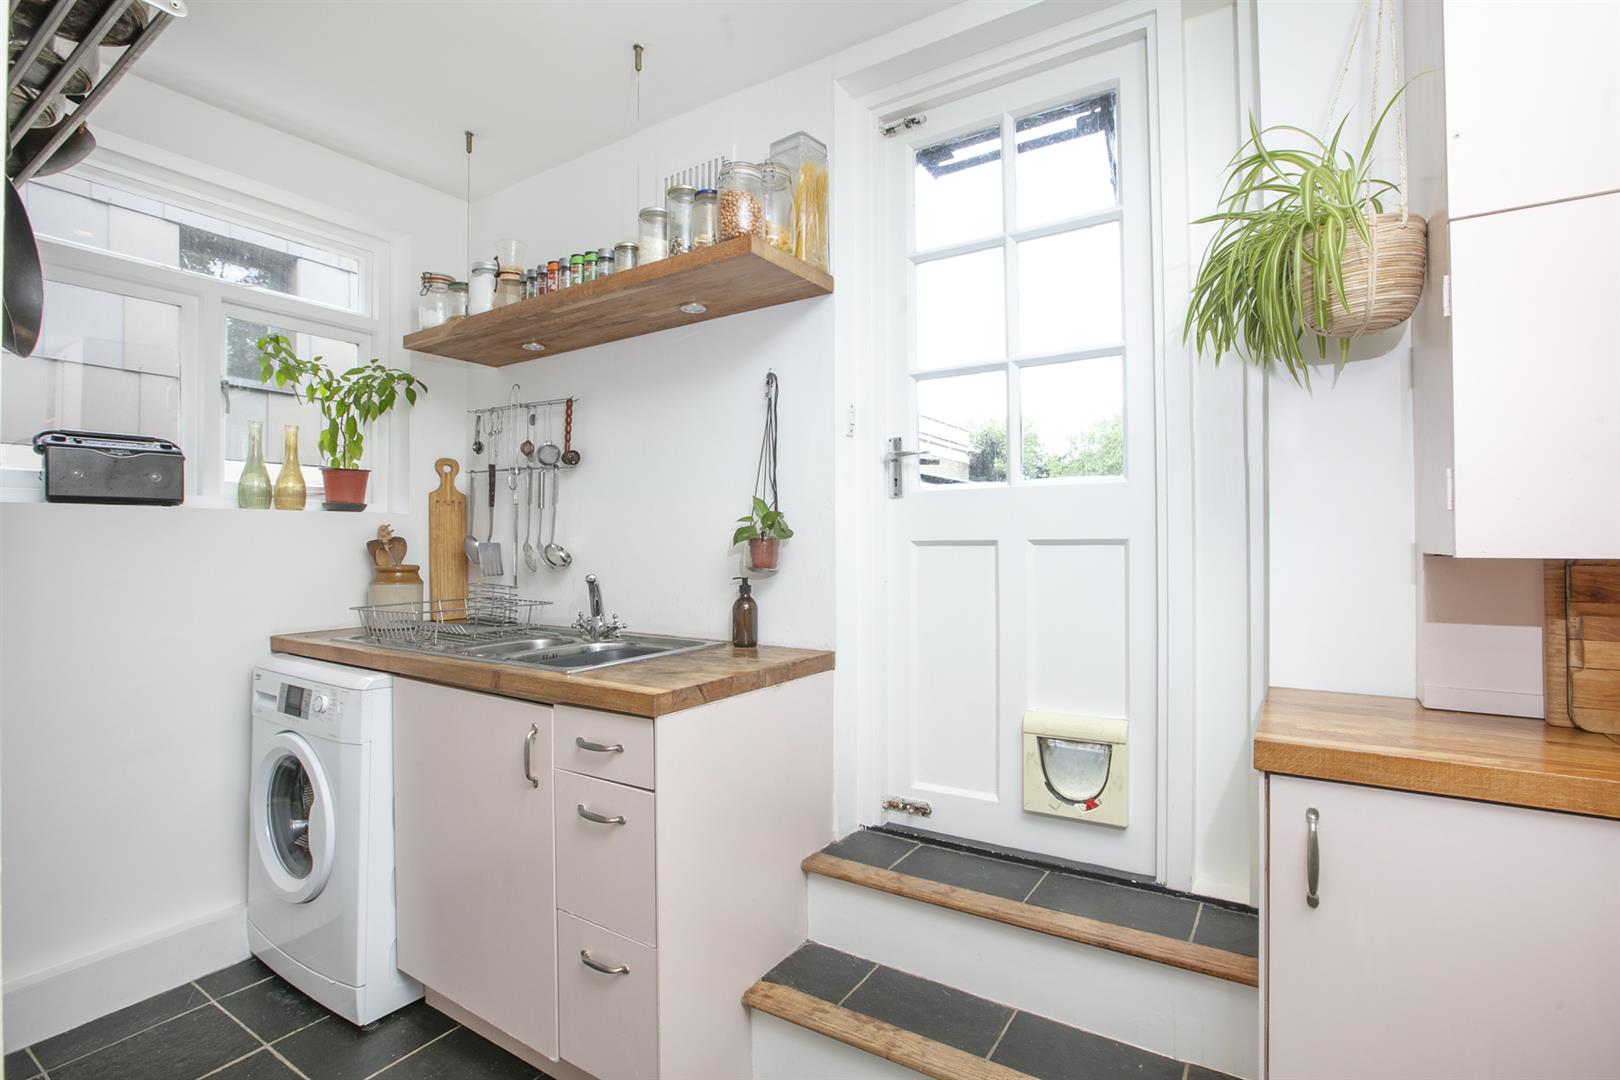 Flat - Conversion For Sale in Peckham Road, Camberwell, SE5 859 view7